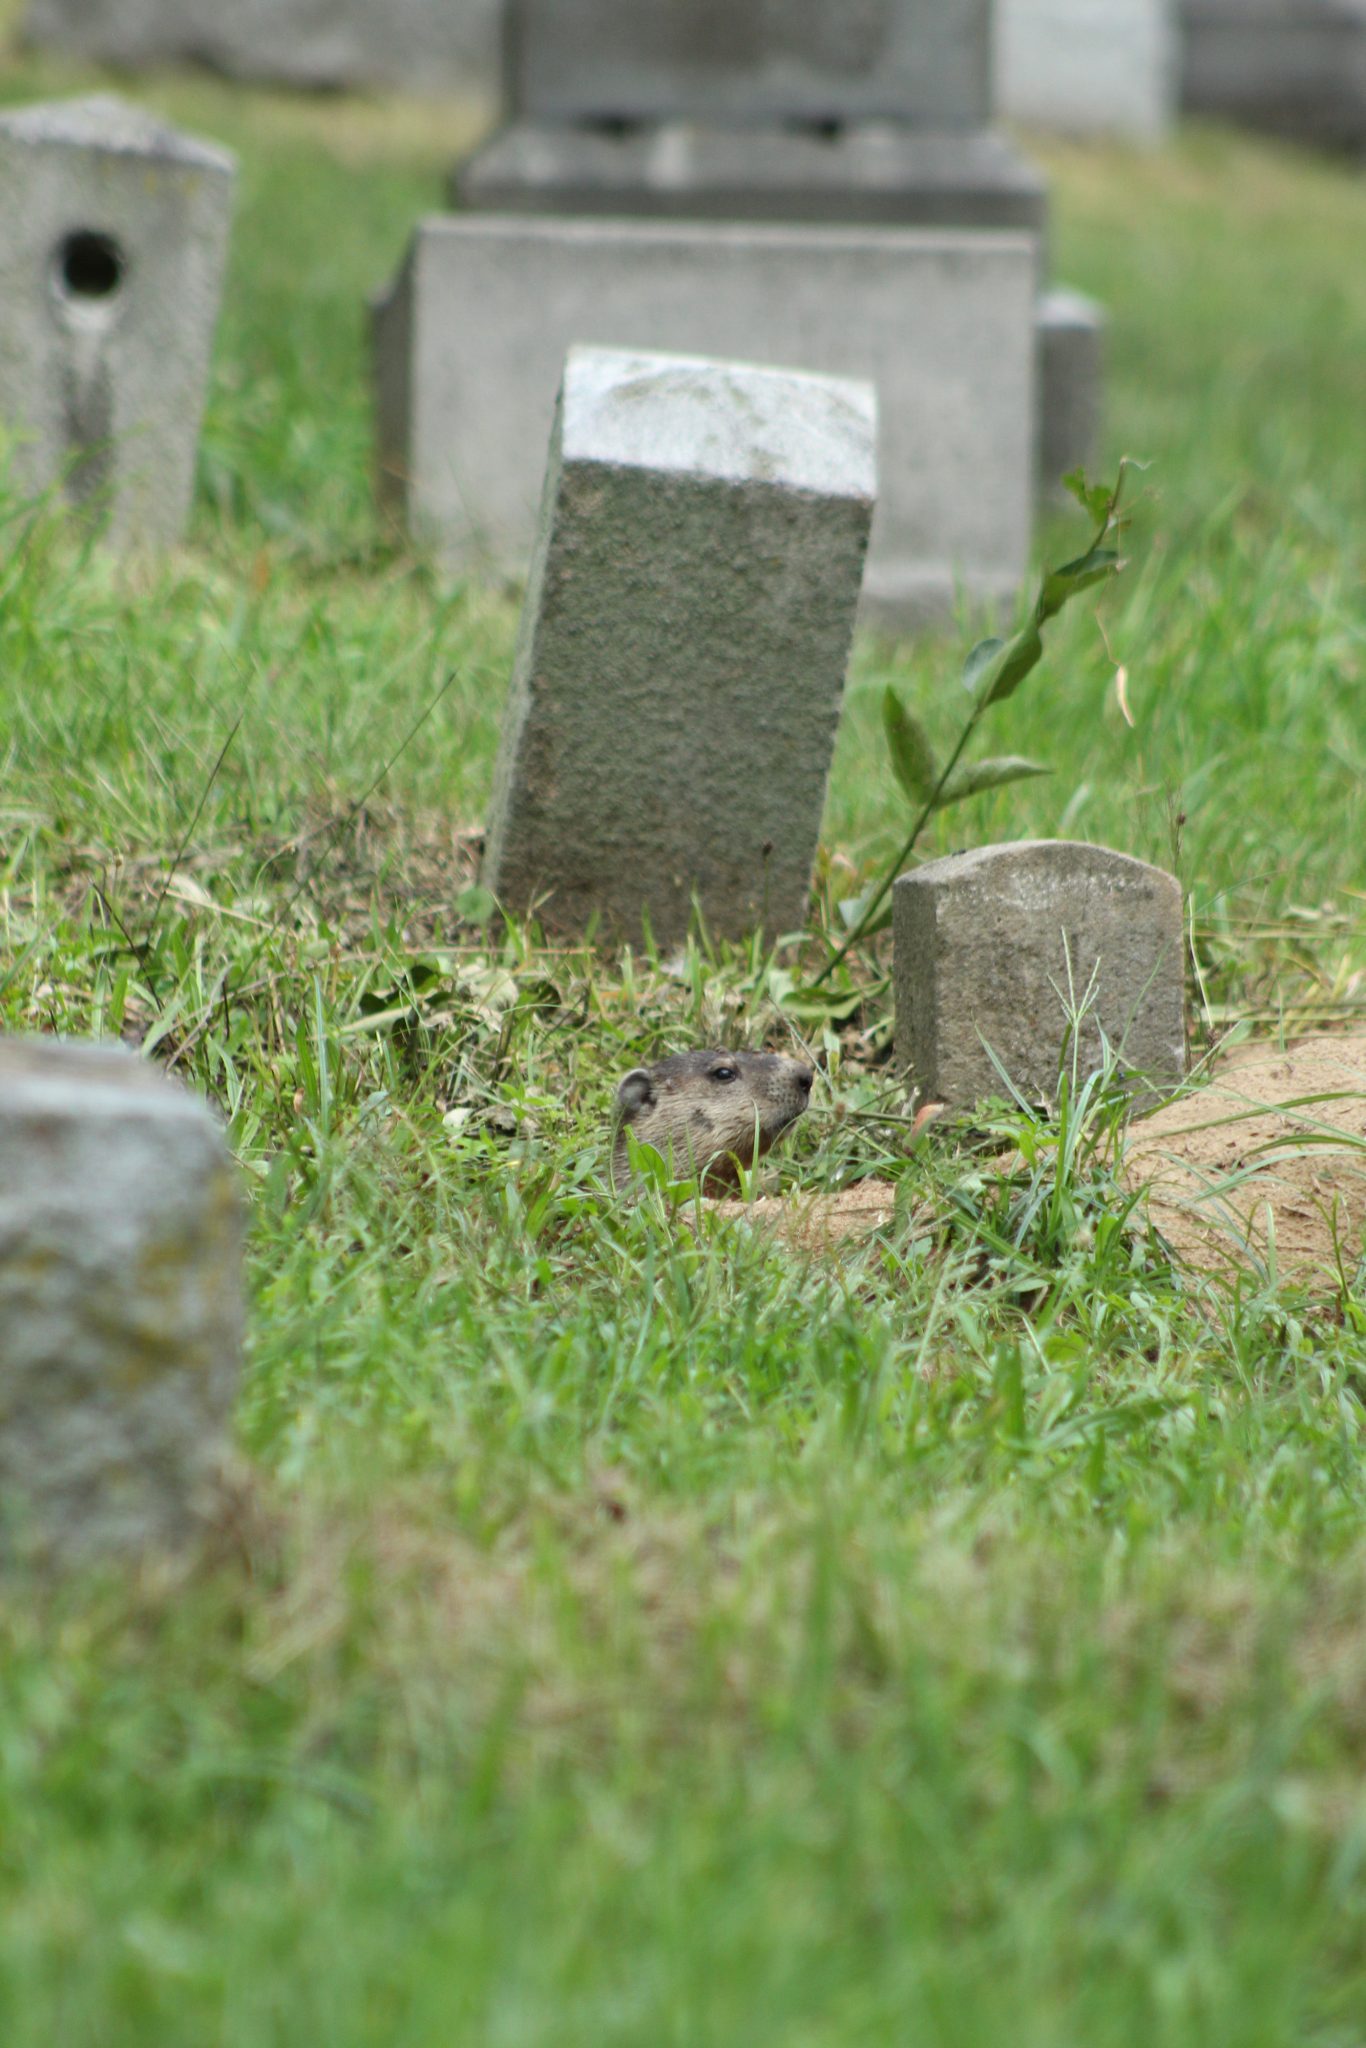 A groundhog comes up out of a grave at Mt. Hope Cemetery in Rochester, New York. Tags: groundhog, woodchuck, cemetery, grave, graveyard, Mt. Hope Cemetery, Rochester, New York.